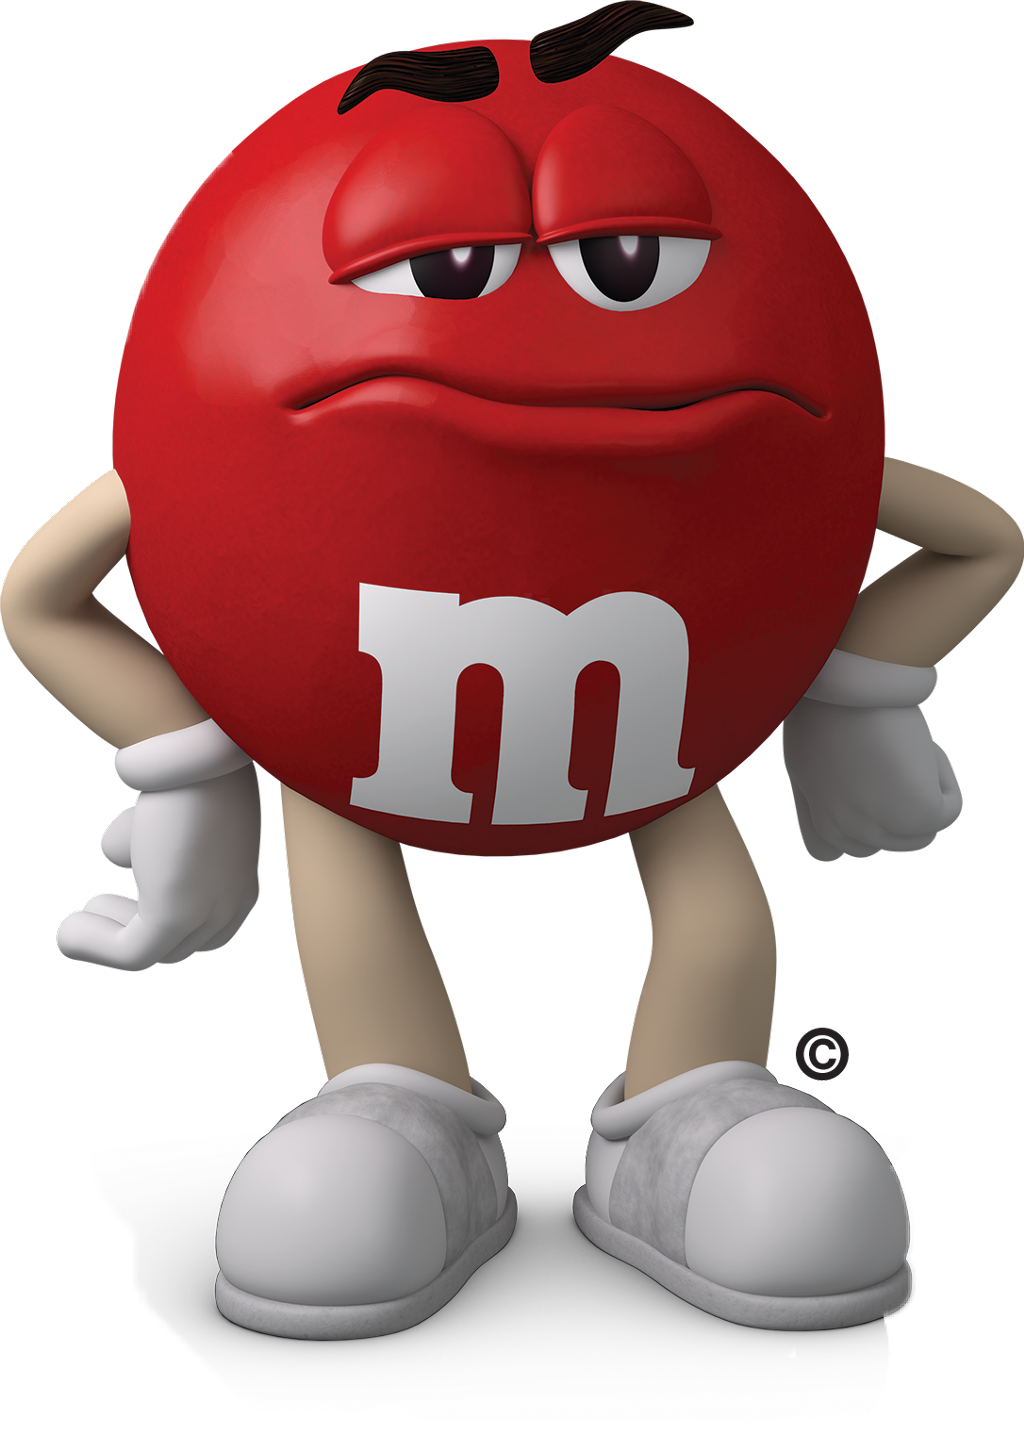 TIL that the seductive nature of the Green M&M is a reference to